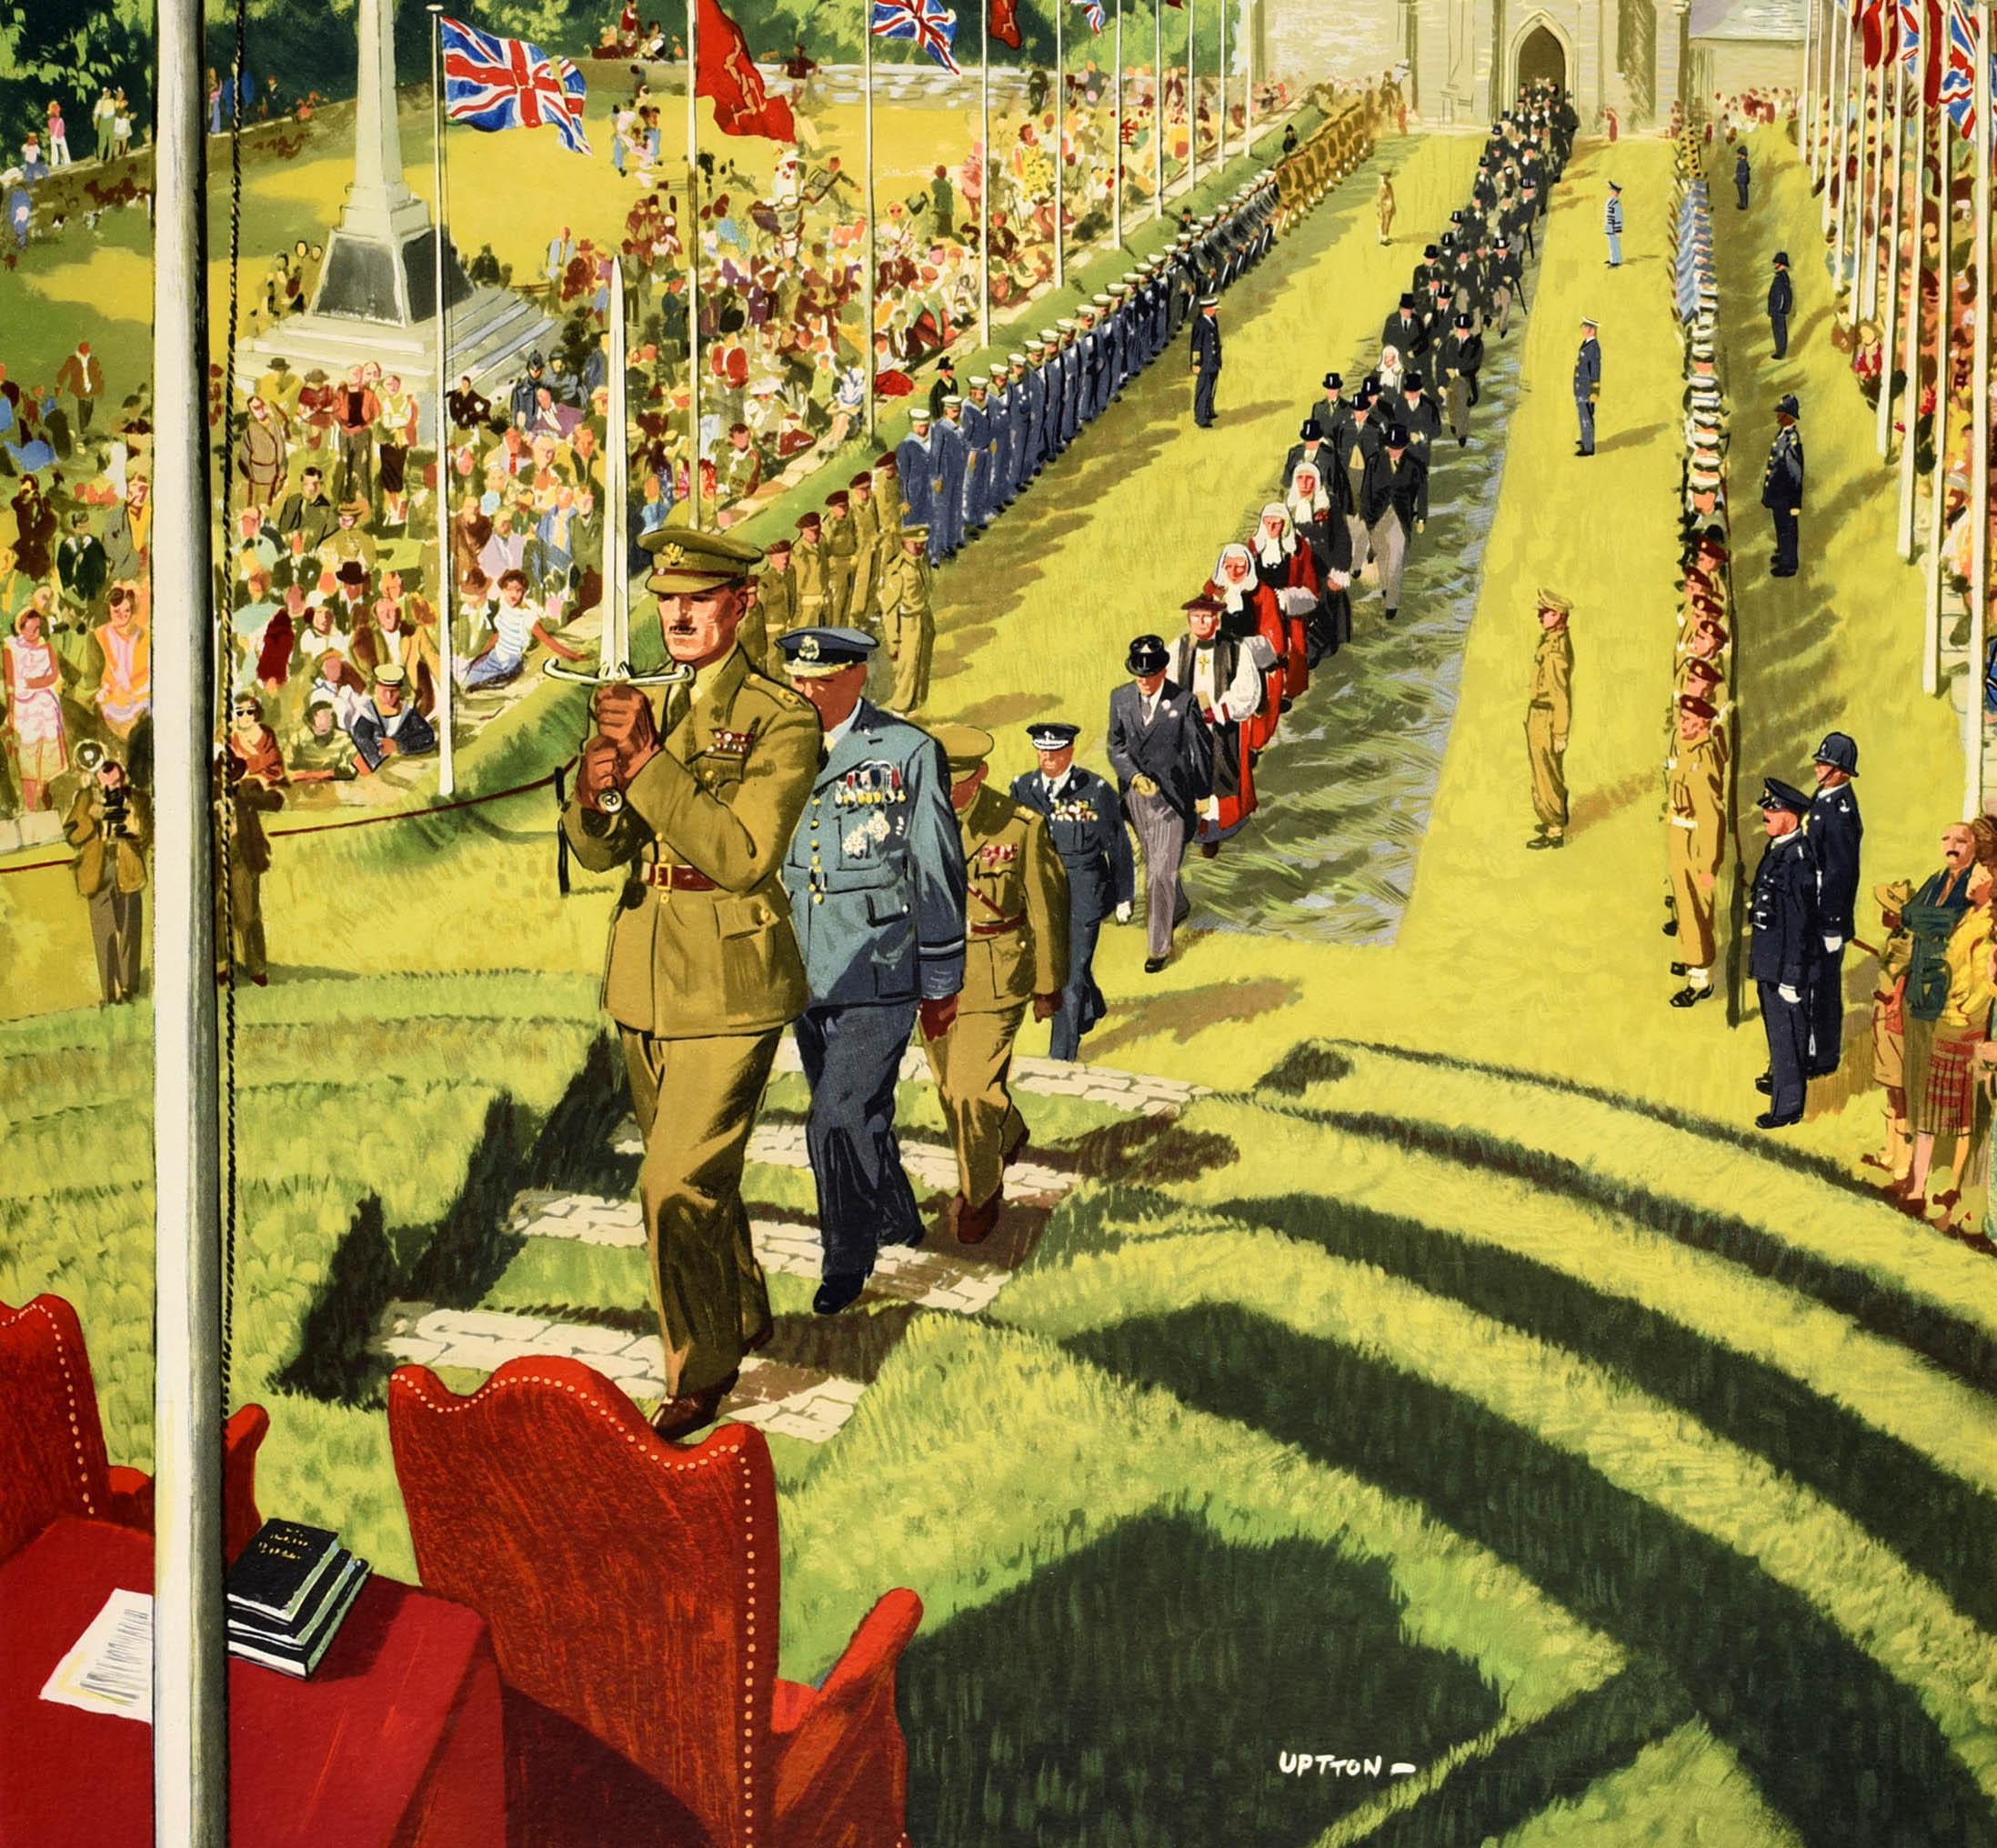 Original vintage travel poster for the Isle of Man issued by British Railways featuring a colourful image by the British artist and illustrator Clive Uptton (1911-2006) featuring a view of a ceremonial procession led by an army officer holding up a